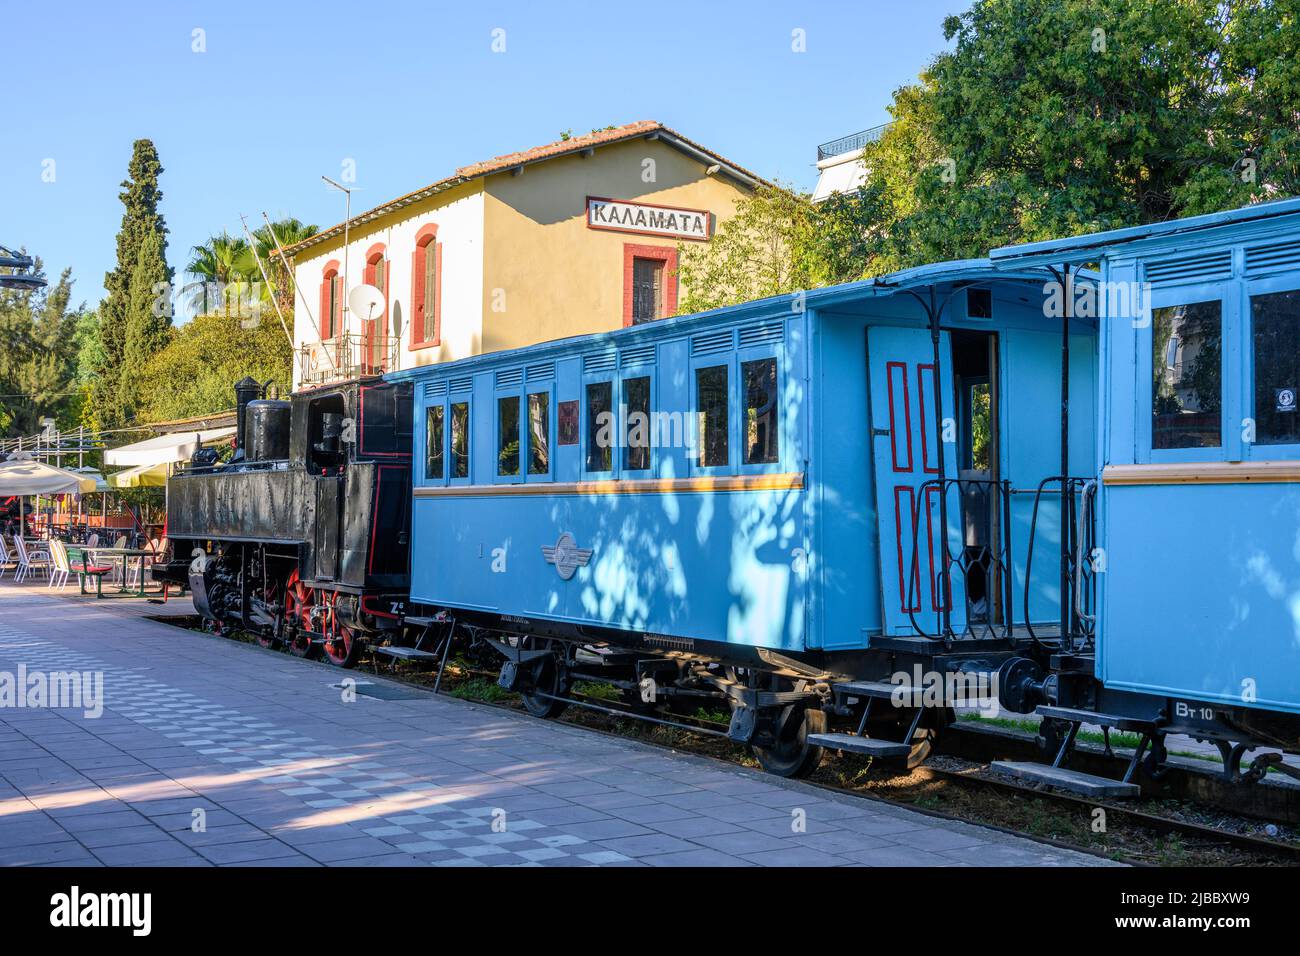 Old Trains and wagons in Kalamata Municipal Railway Park, The old station is now a cafe, Kalamata, Messinia, Peloponnese, Greece Stock Photo